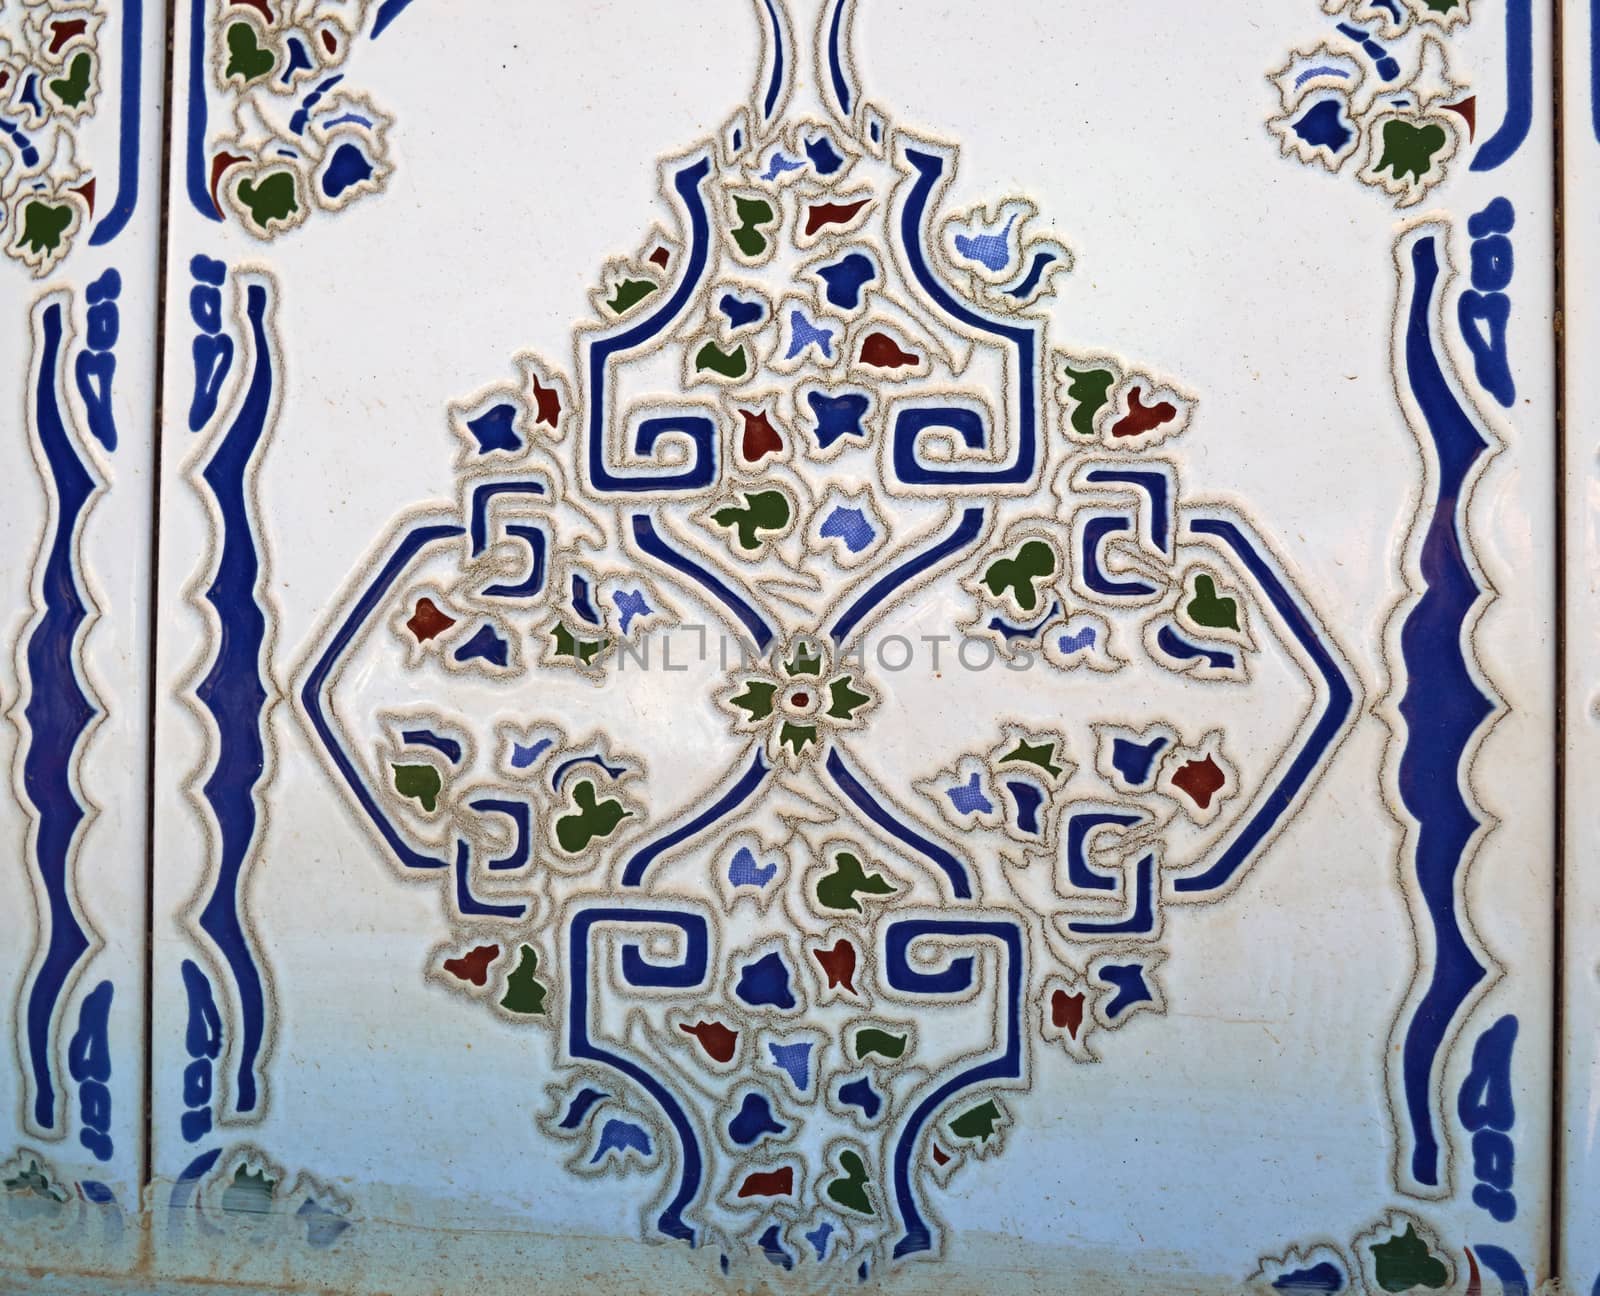 Typical traditional Spanish ceramic tiles by Ronyzmbow